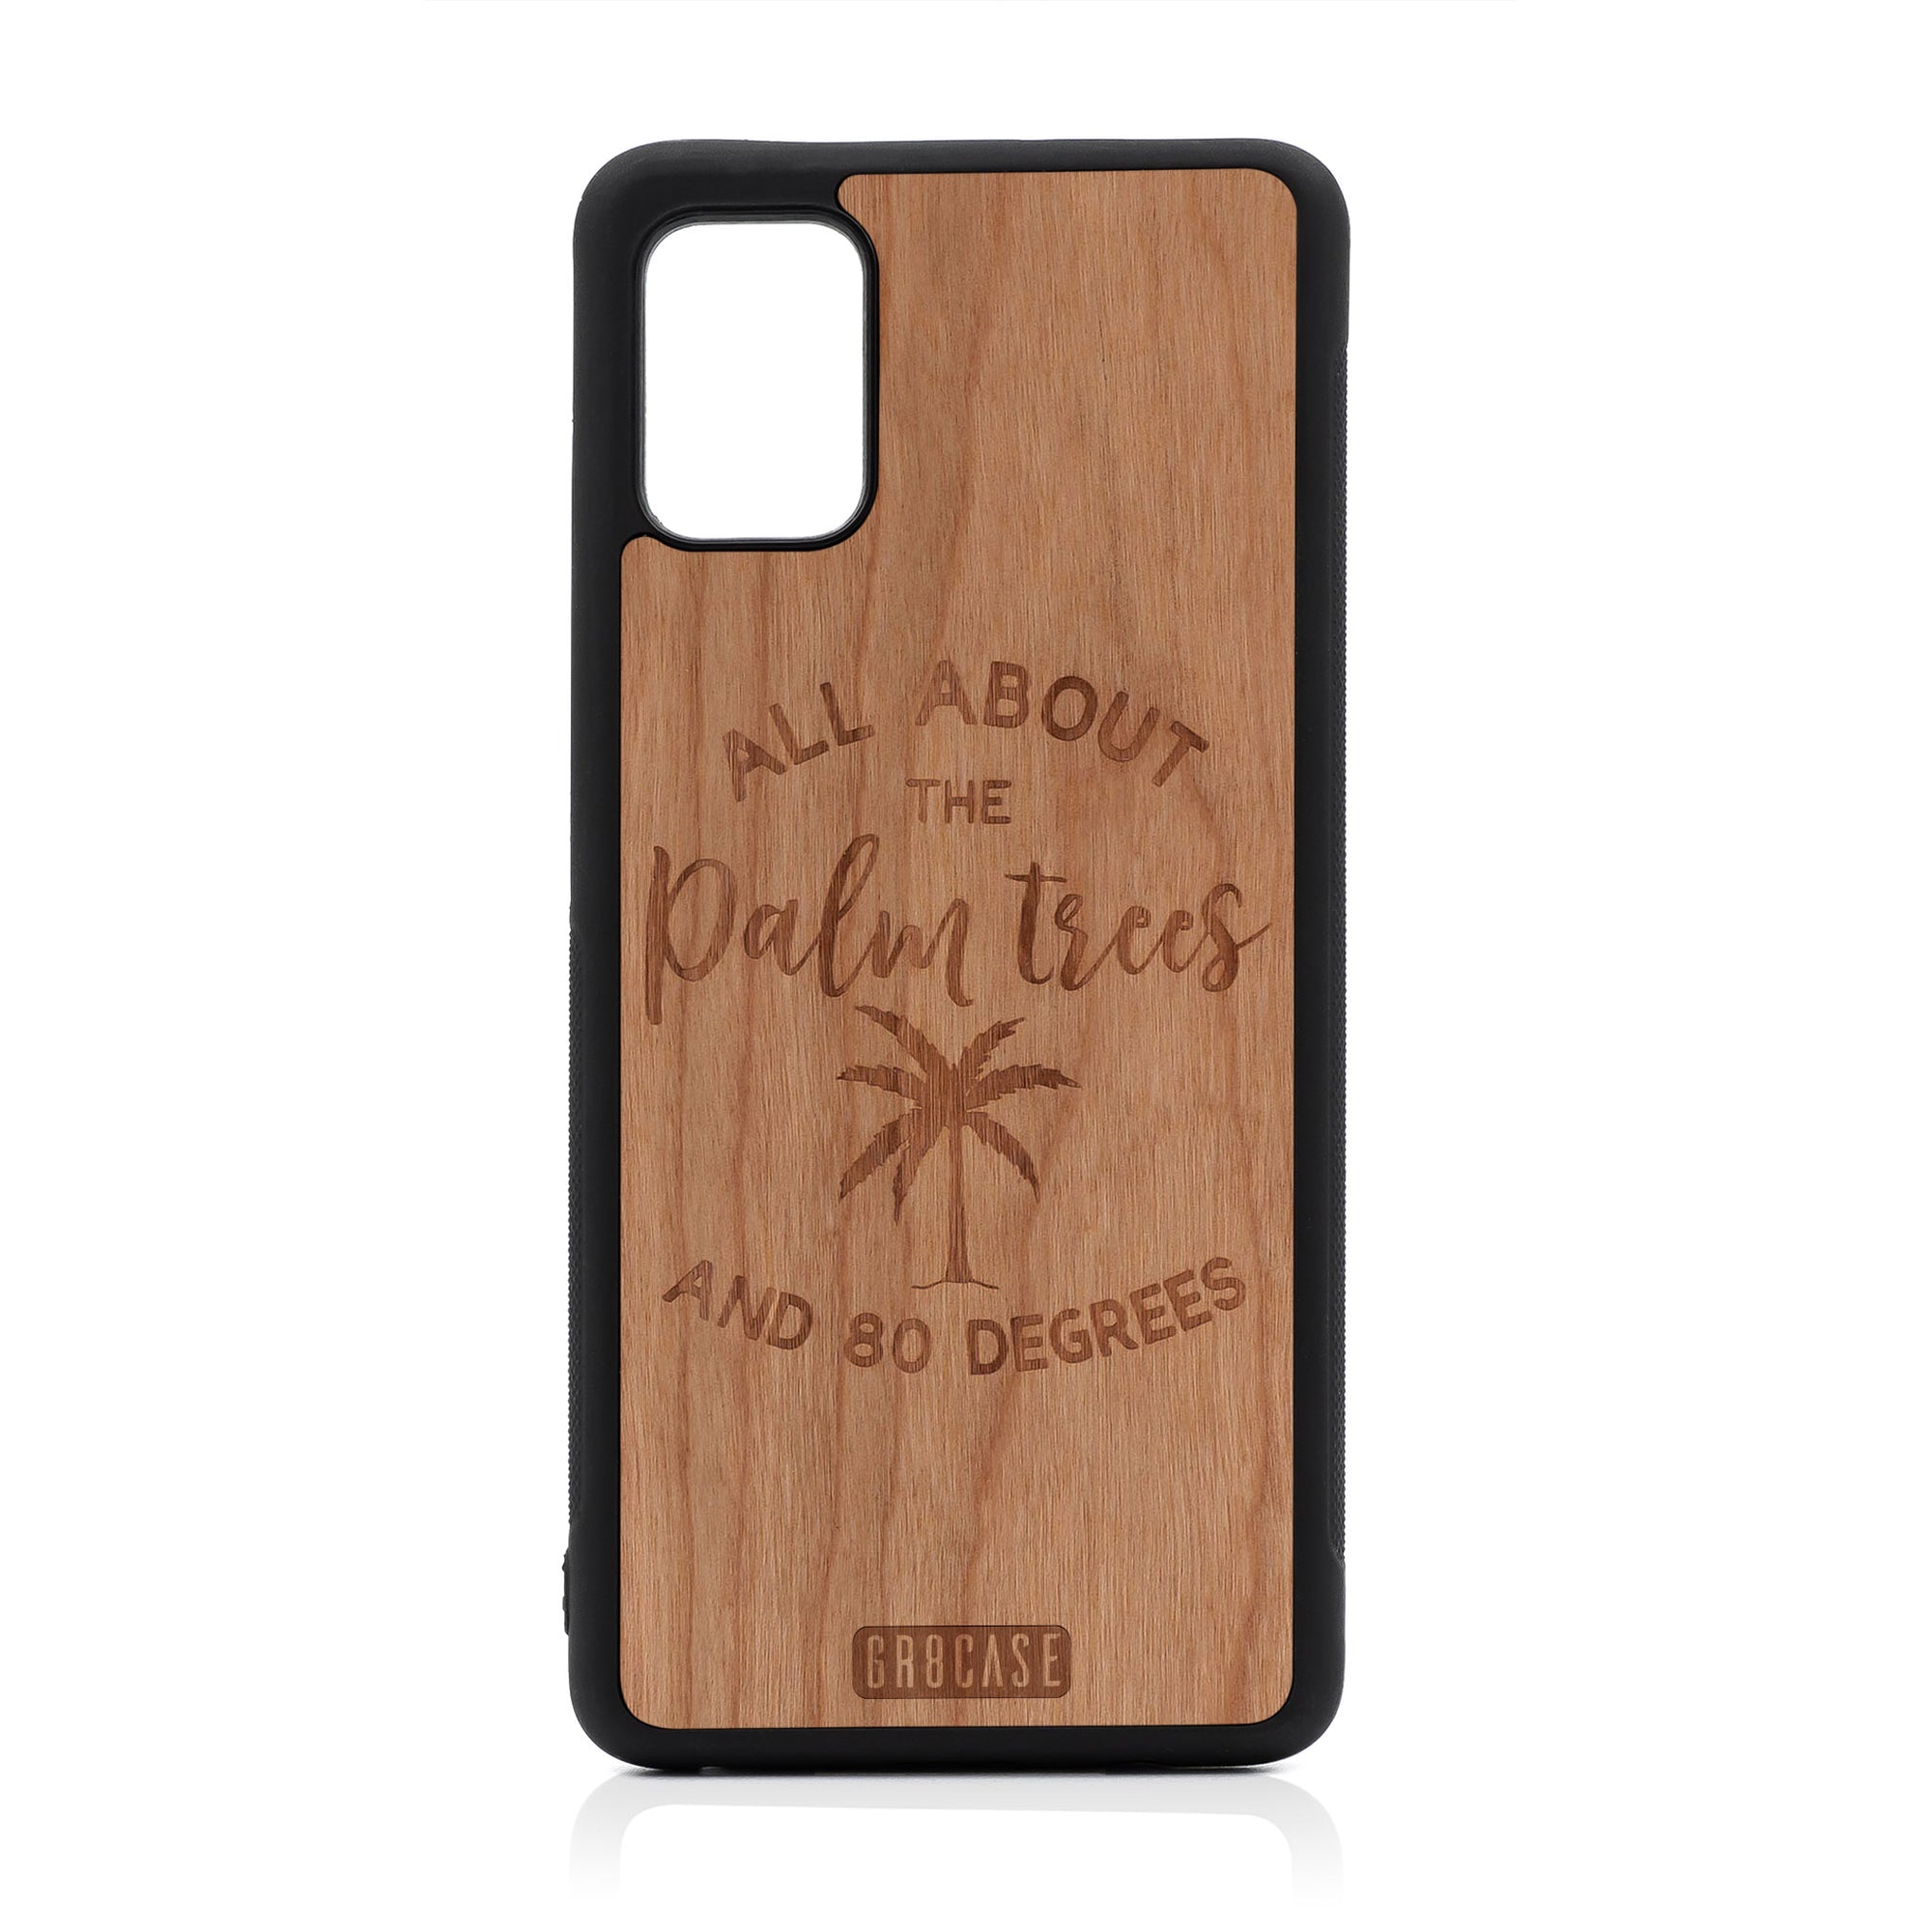 All About The Palm Trees And 80 Degrees Design Wood Case For Samsung Galaxy A51